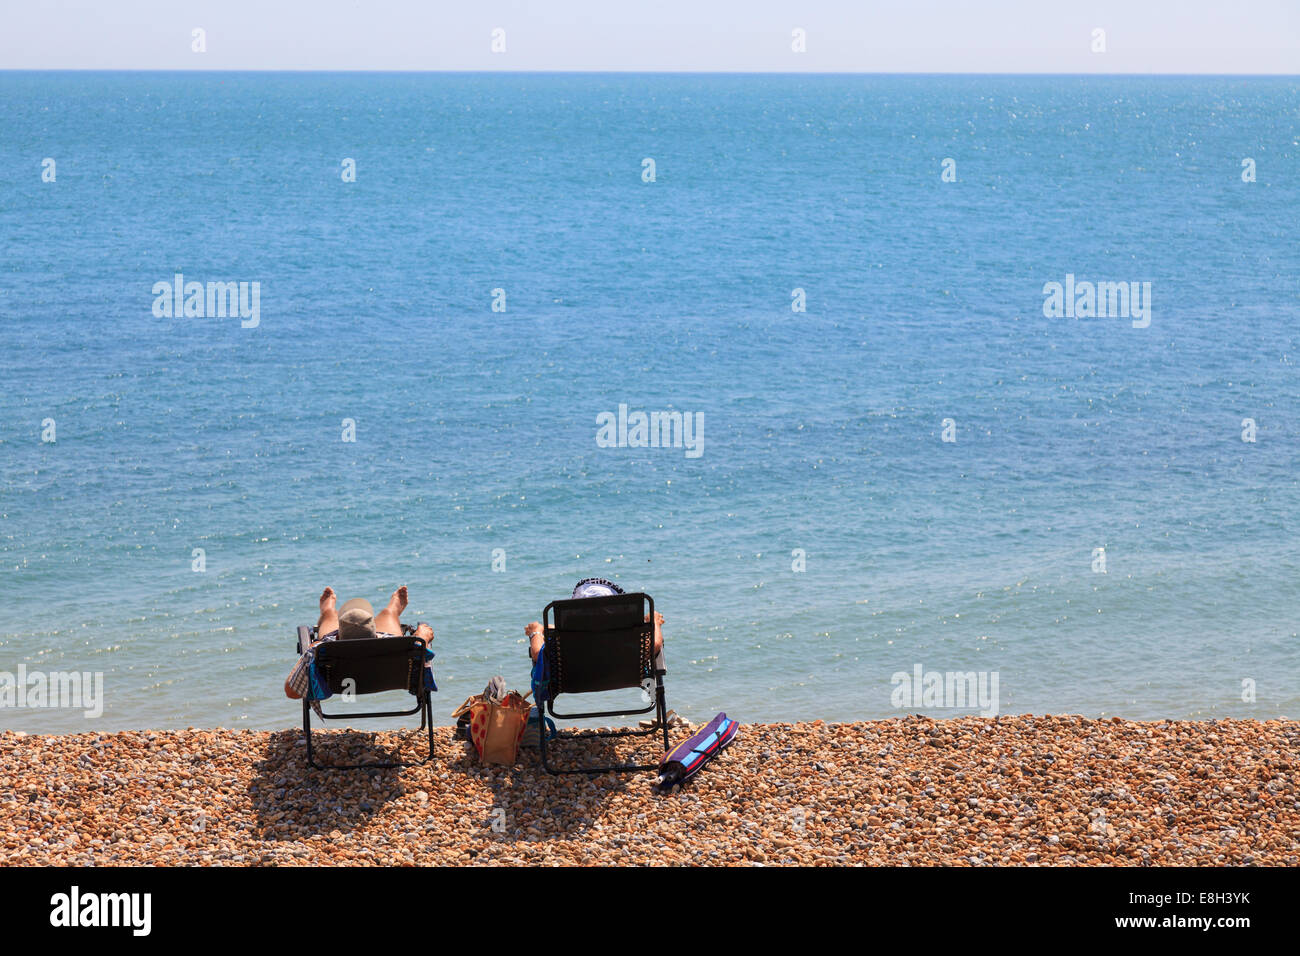 Two people in sun loungers on shingle beach by sea from behind. Stock Photo